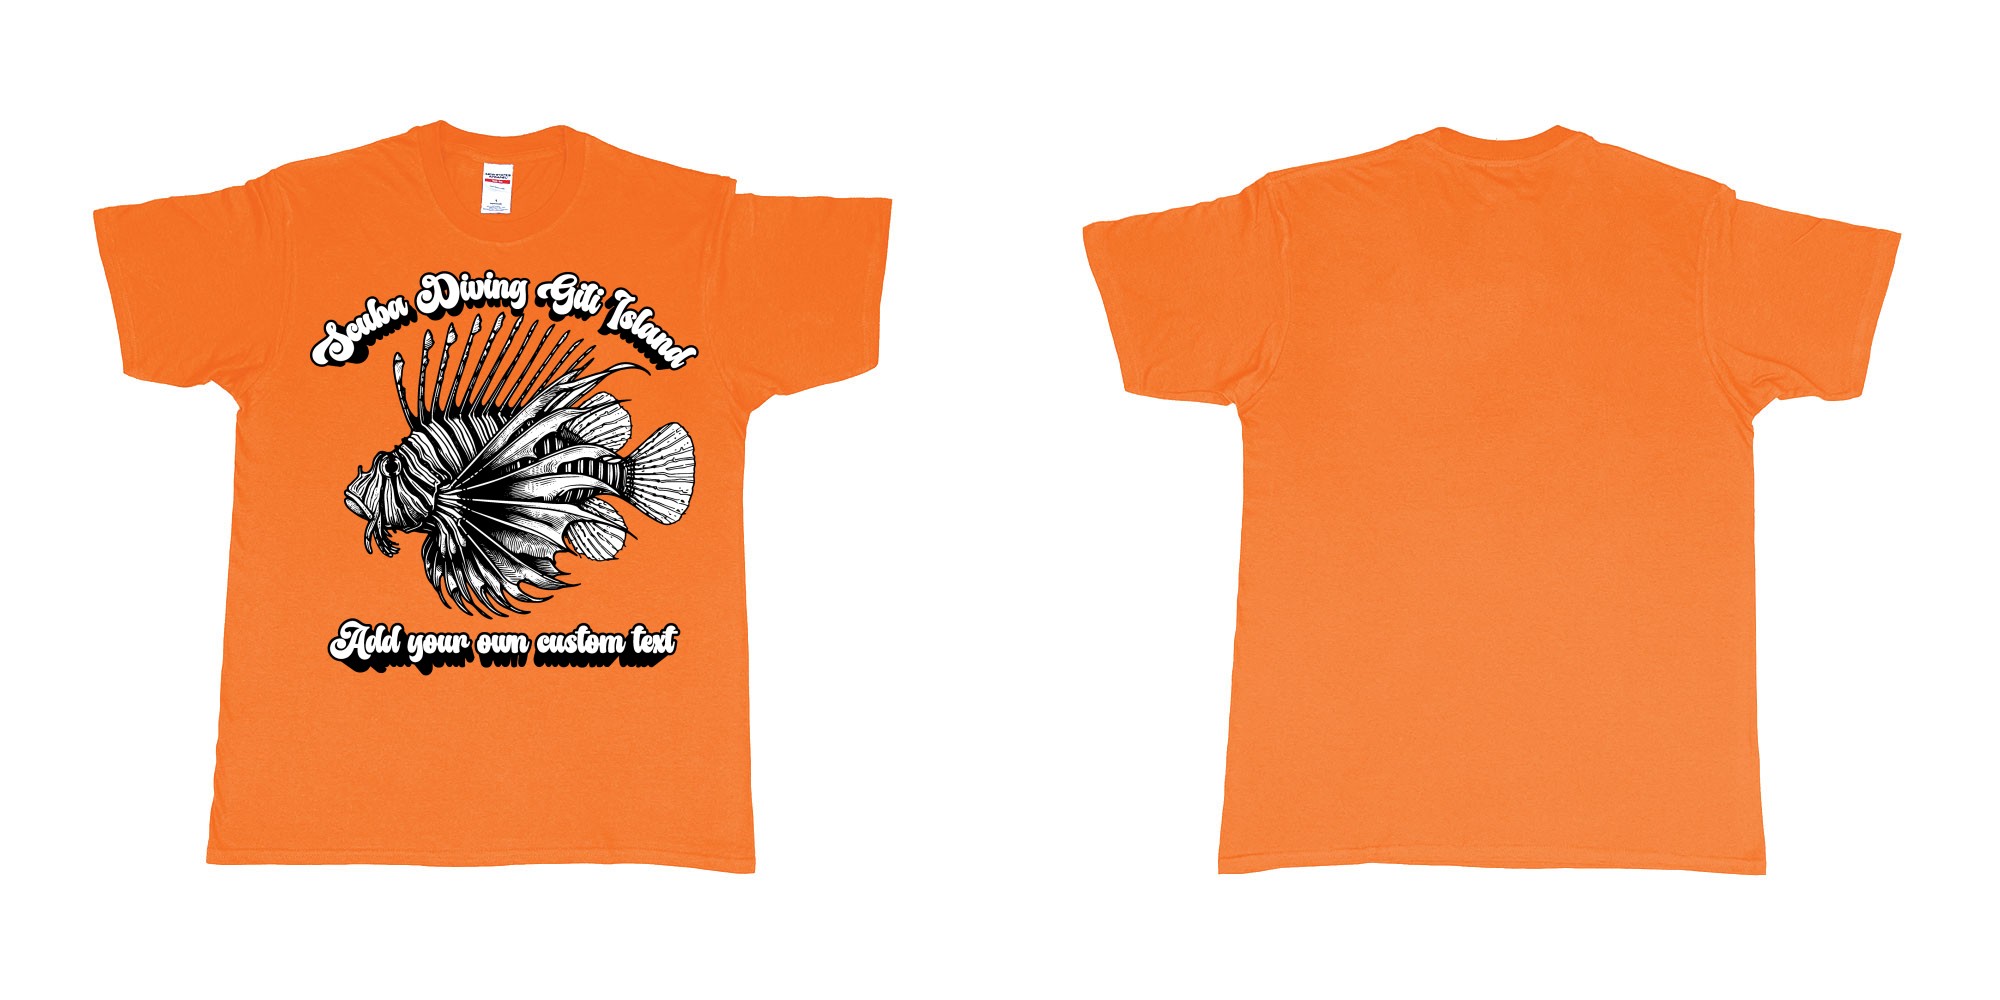 Custom tshirt design lion fish scuba diving gili islands custom print in fabric color orange choice your own text made in Bali by The Pirate Way